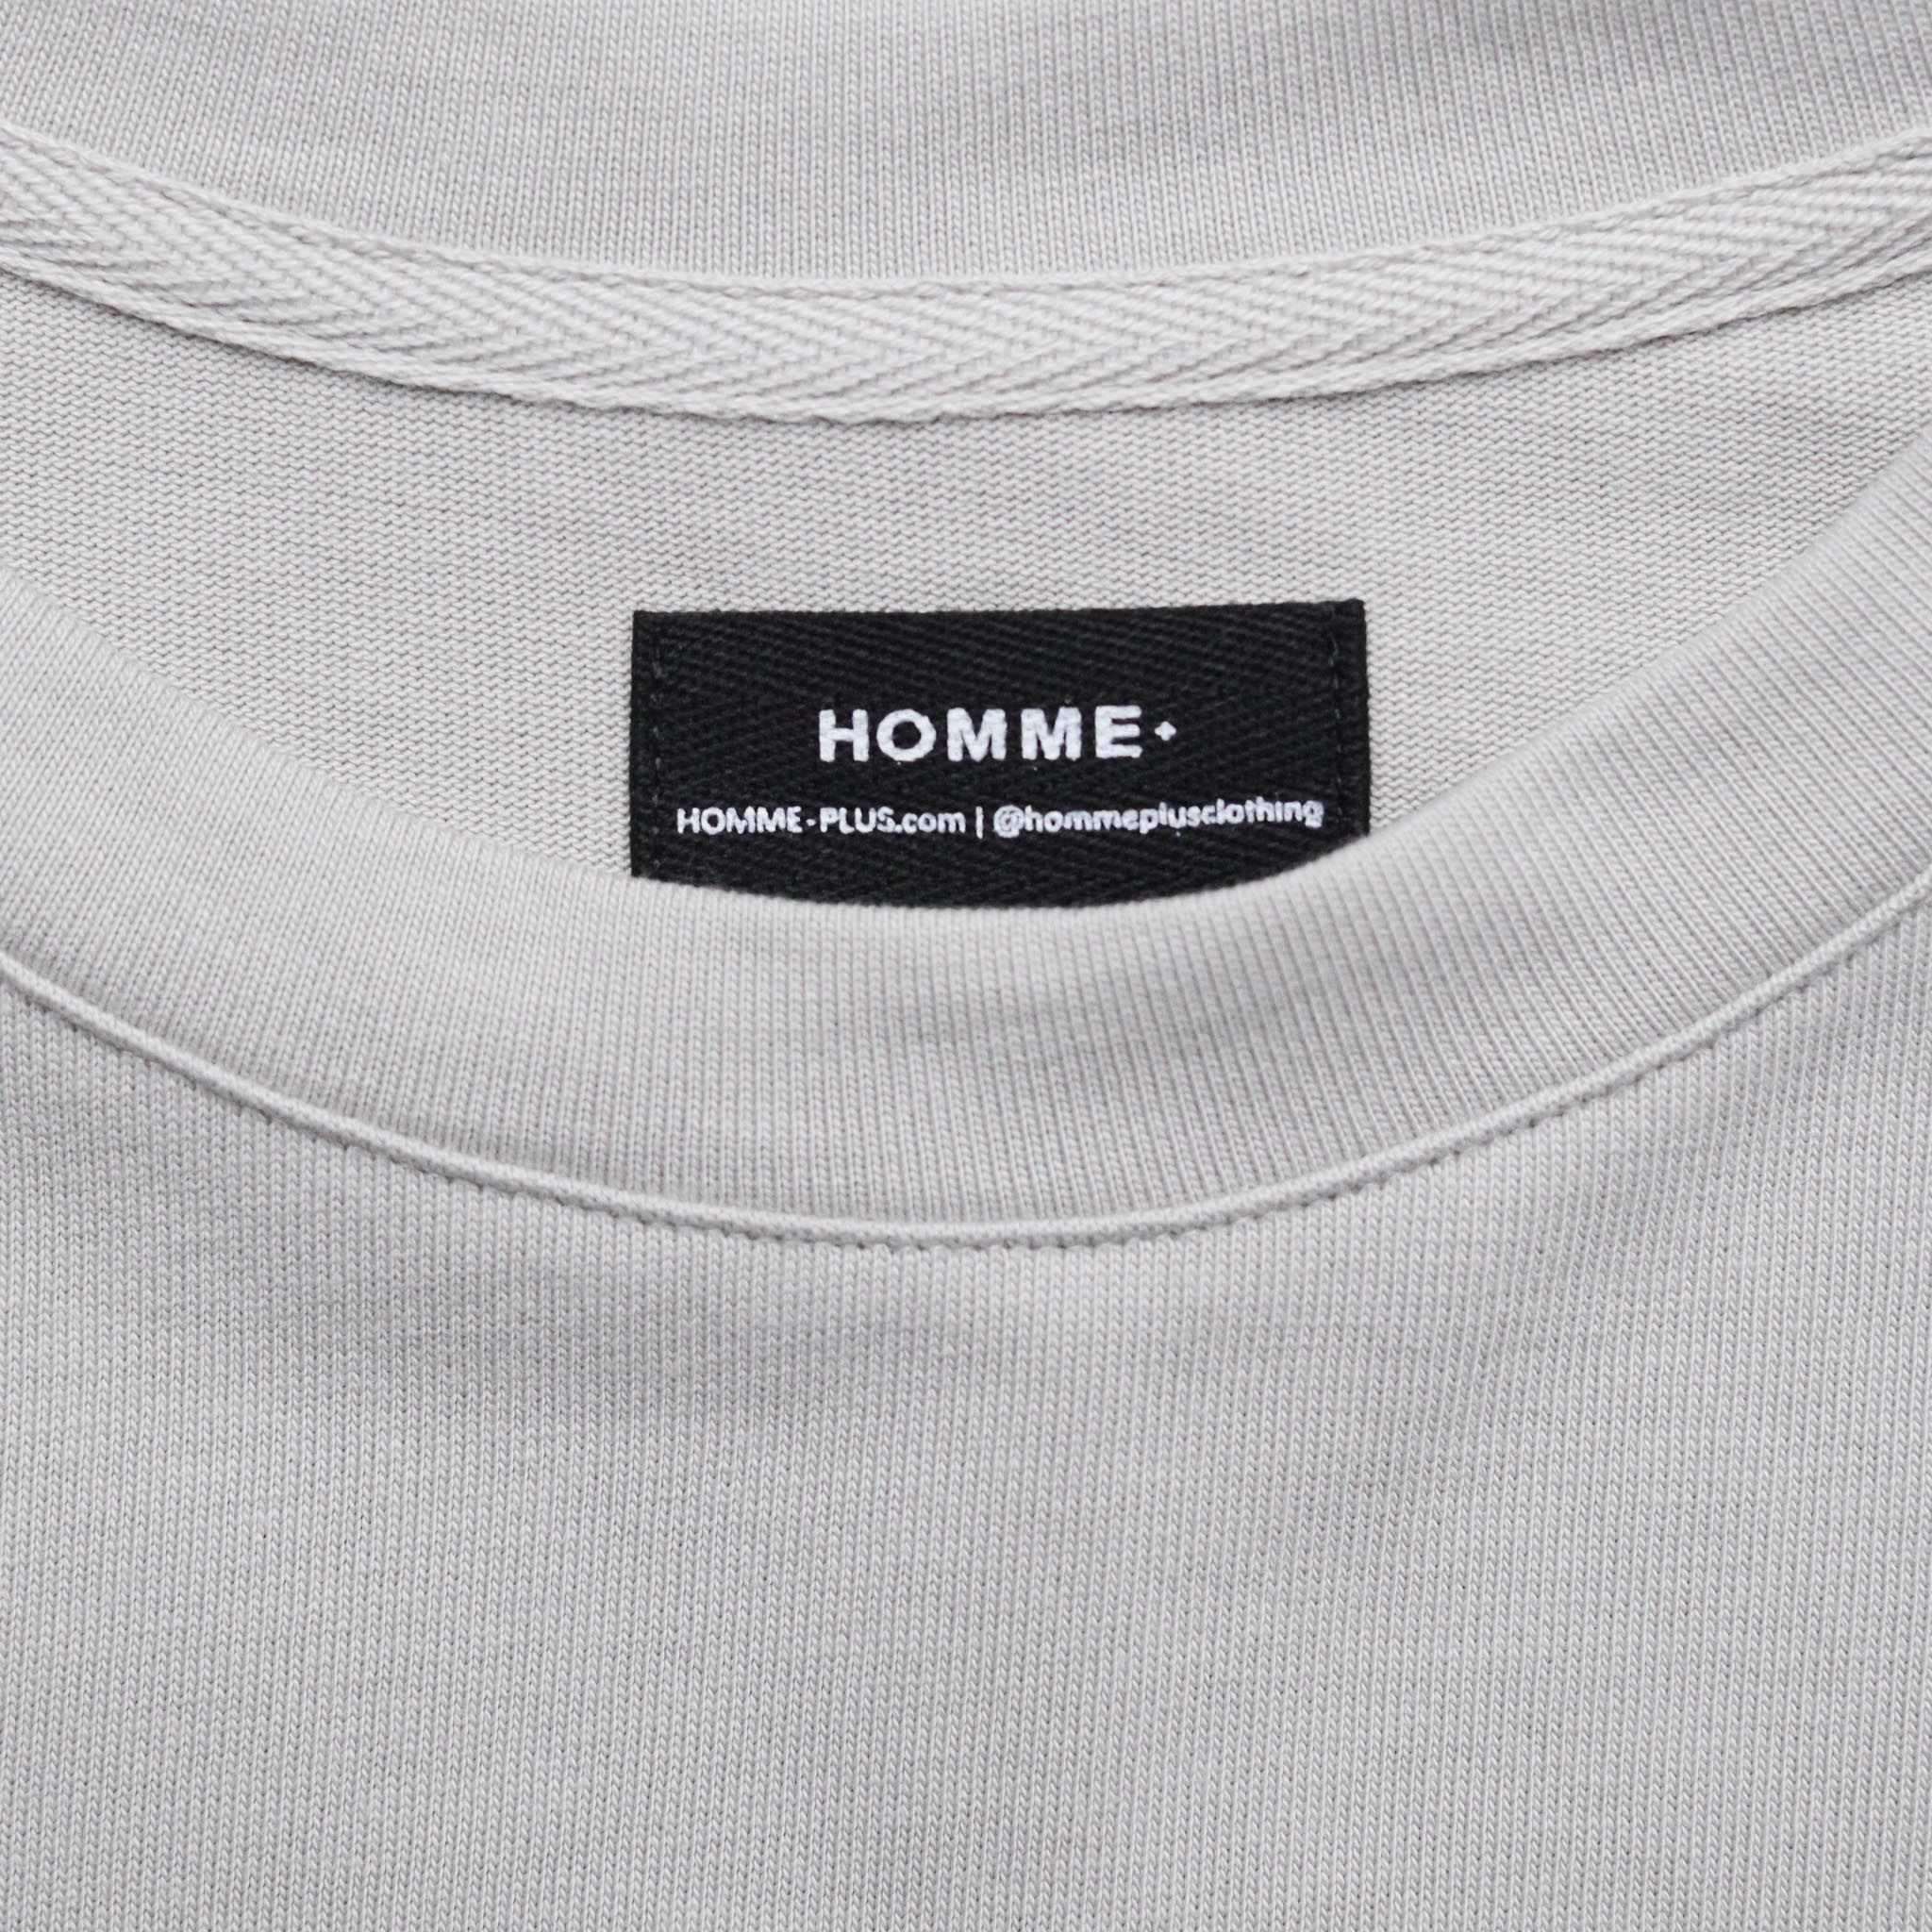 HOMME+ Triangle Patch Tee Light Taupe